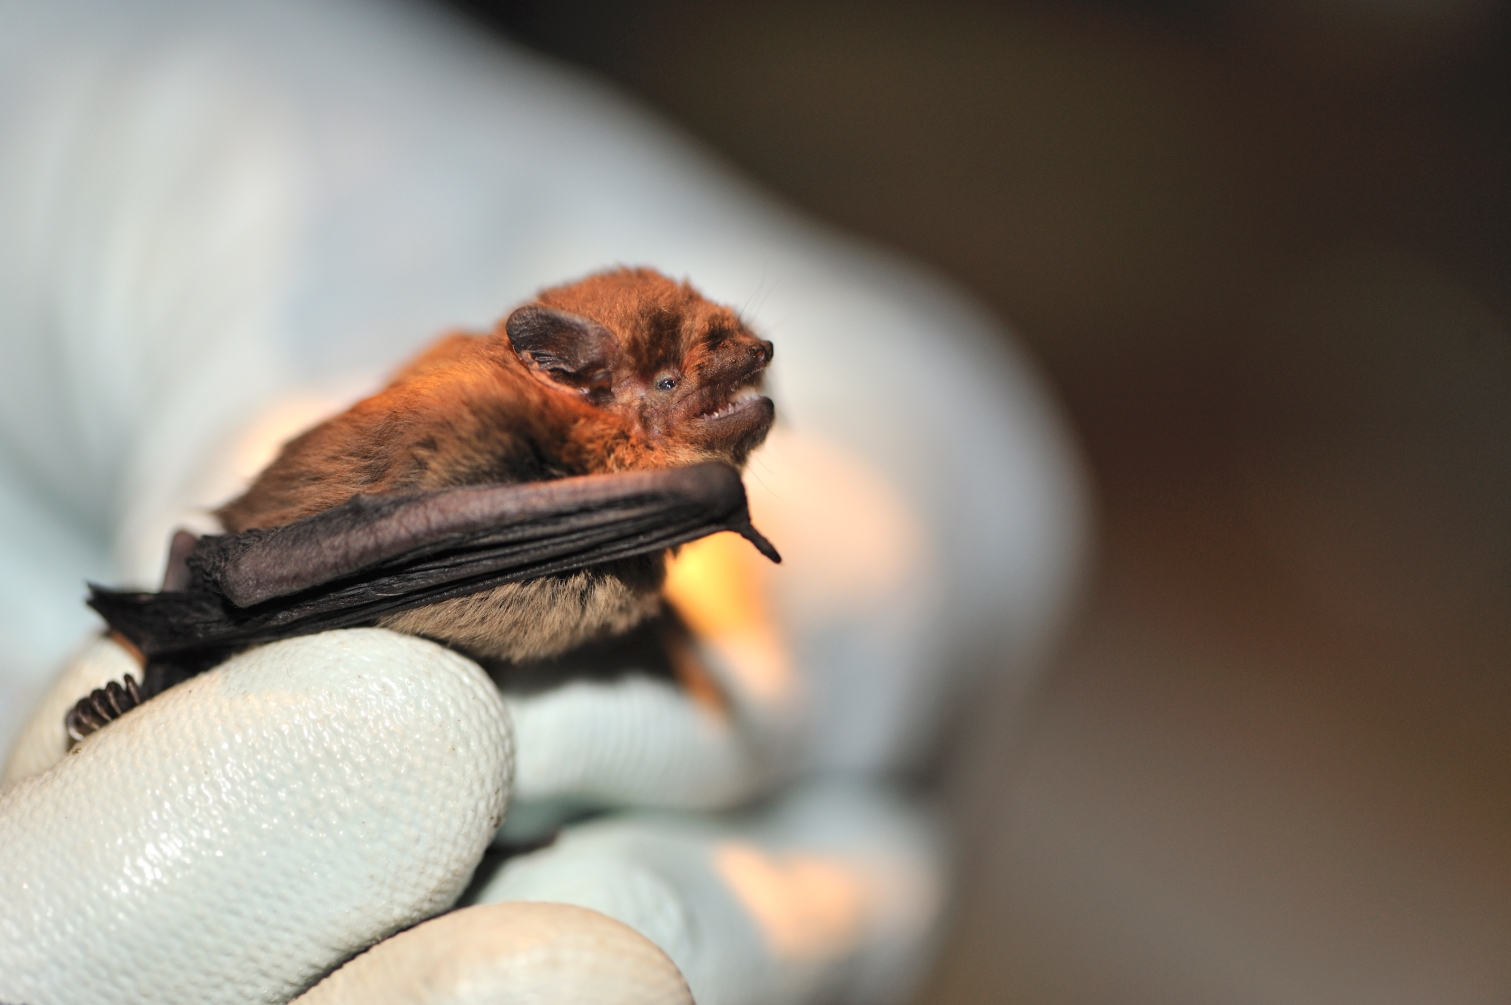 Bat roosts on development sites – what to do